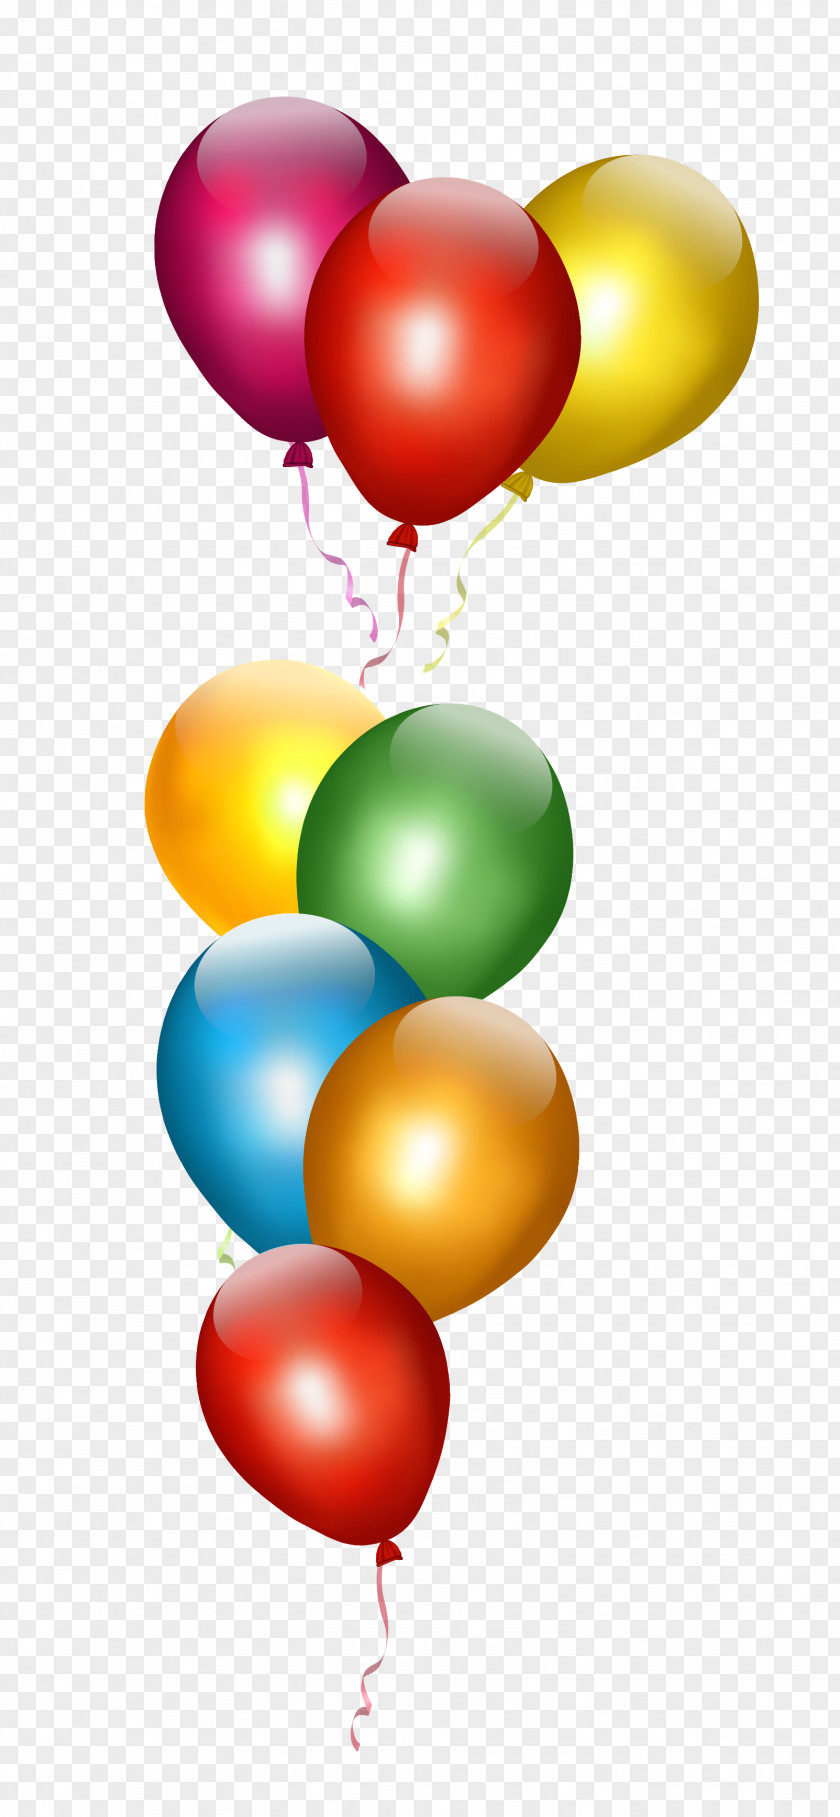 Transparent Balloons Party Toy Balloon Birthday Gift PNG